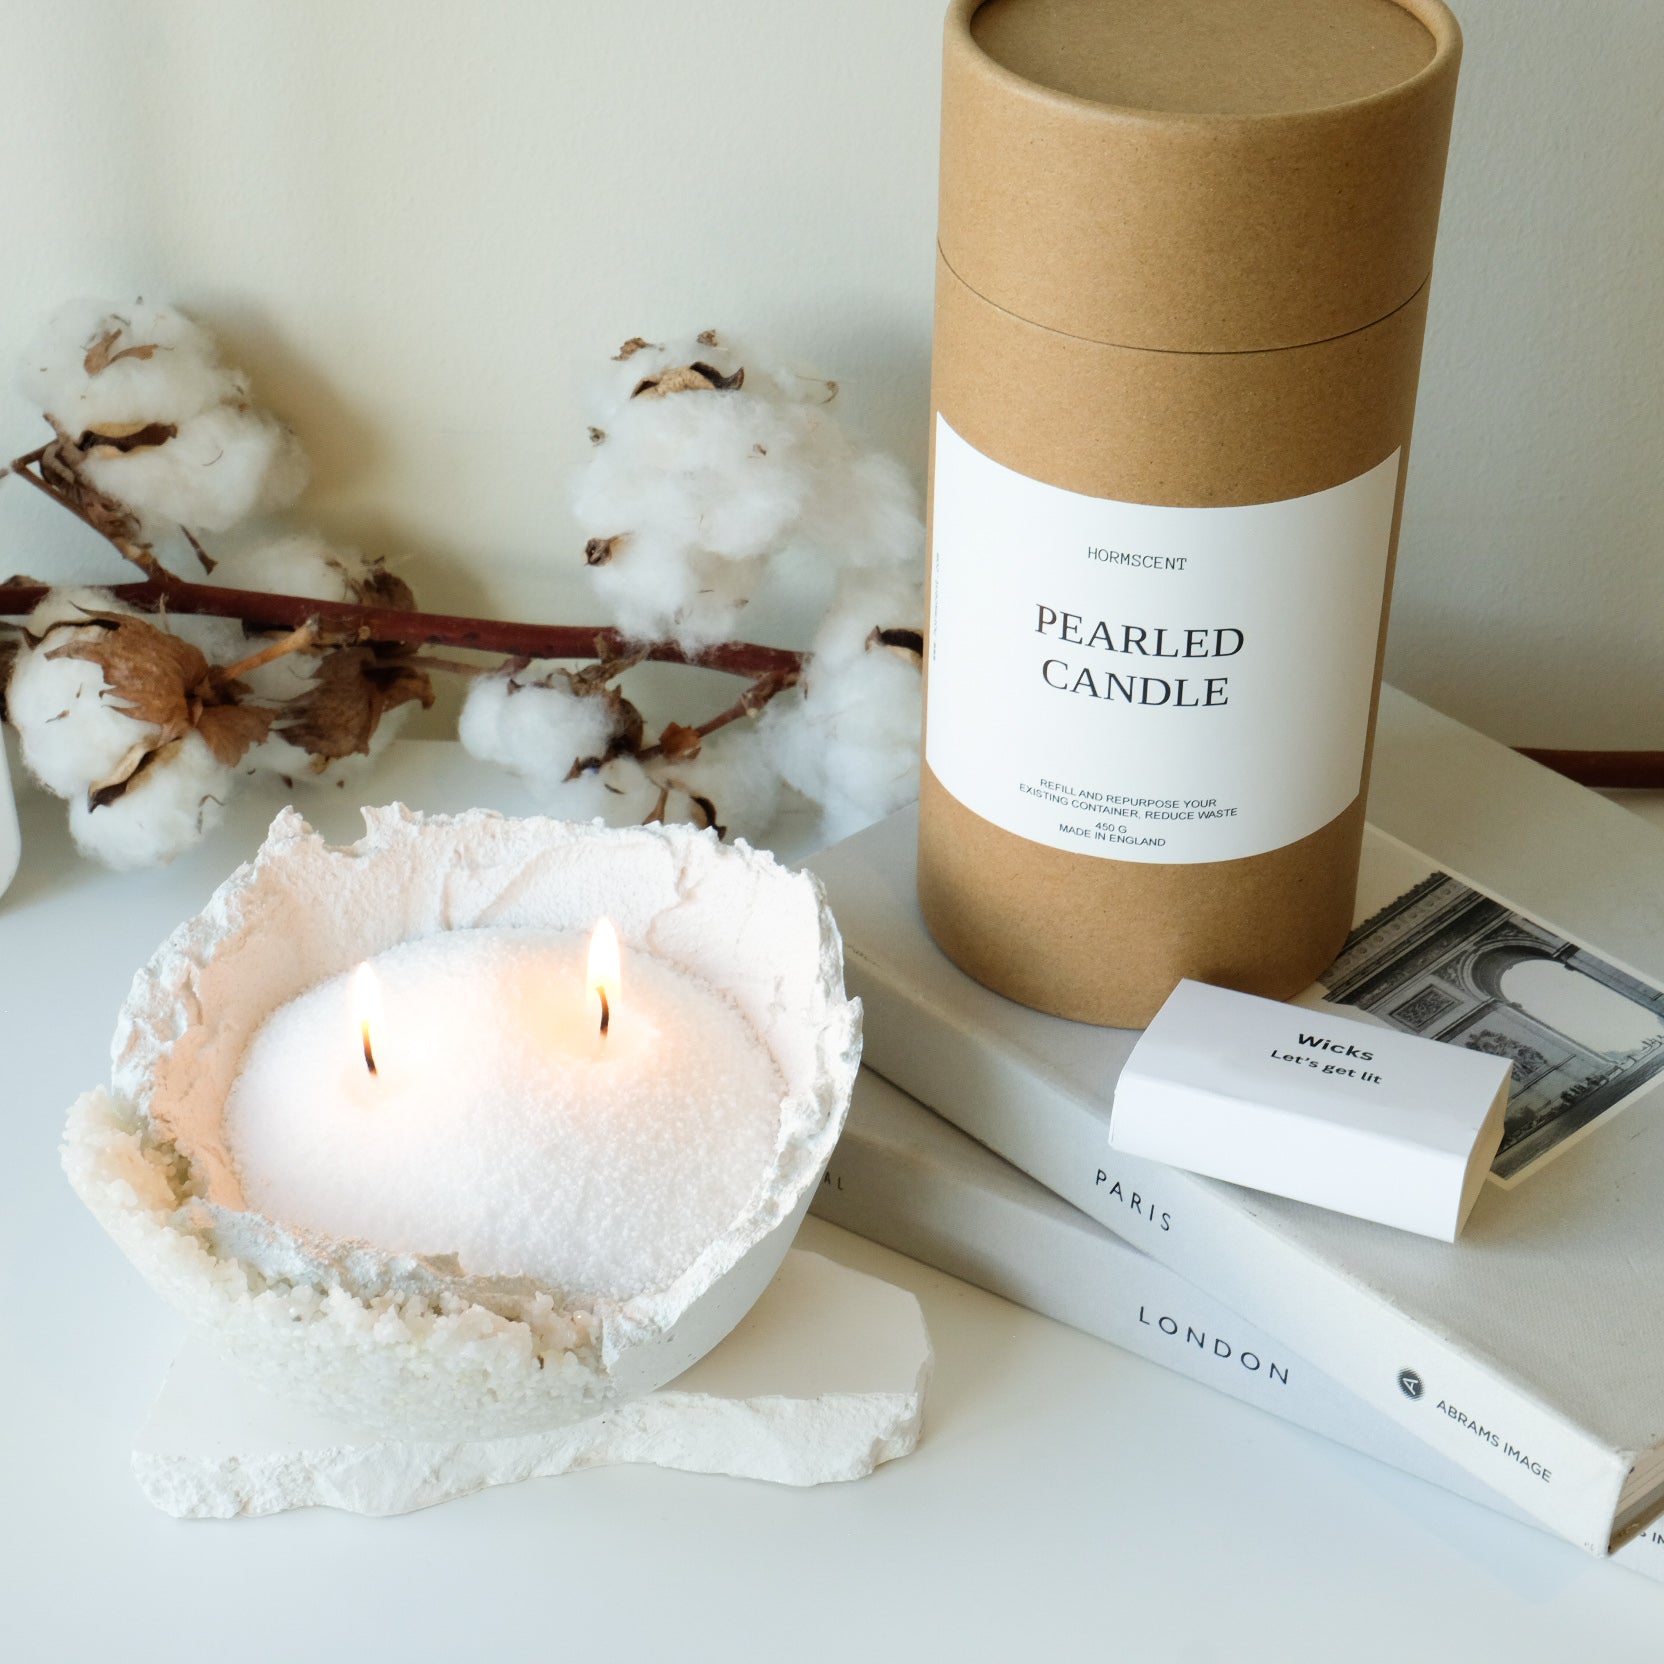 Are pearled candles on your Christmas list yet? The decor possibilitie